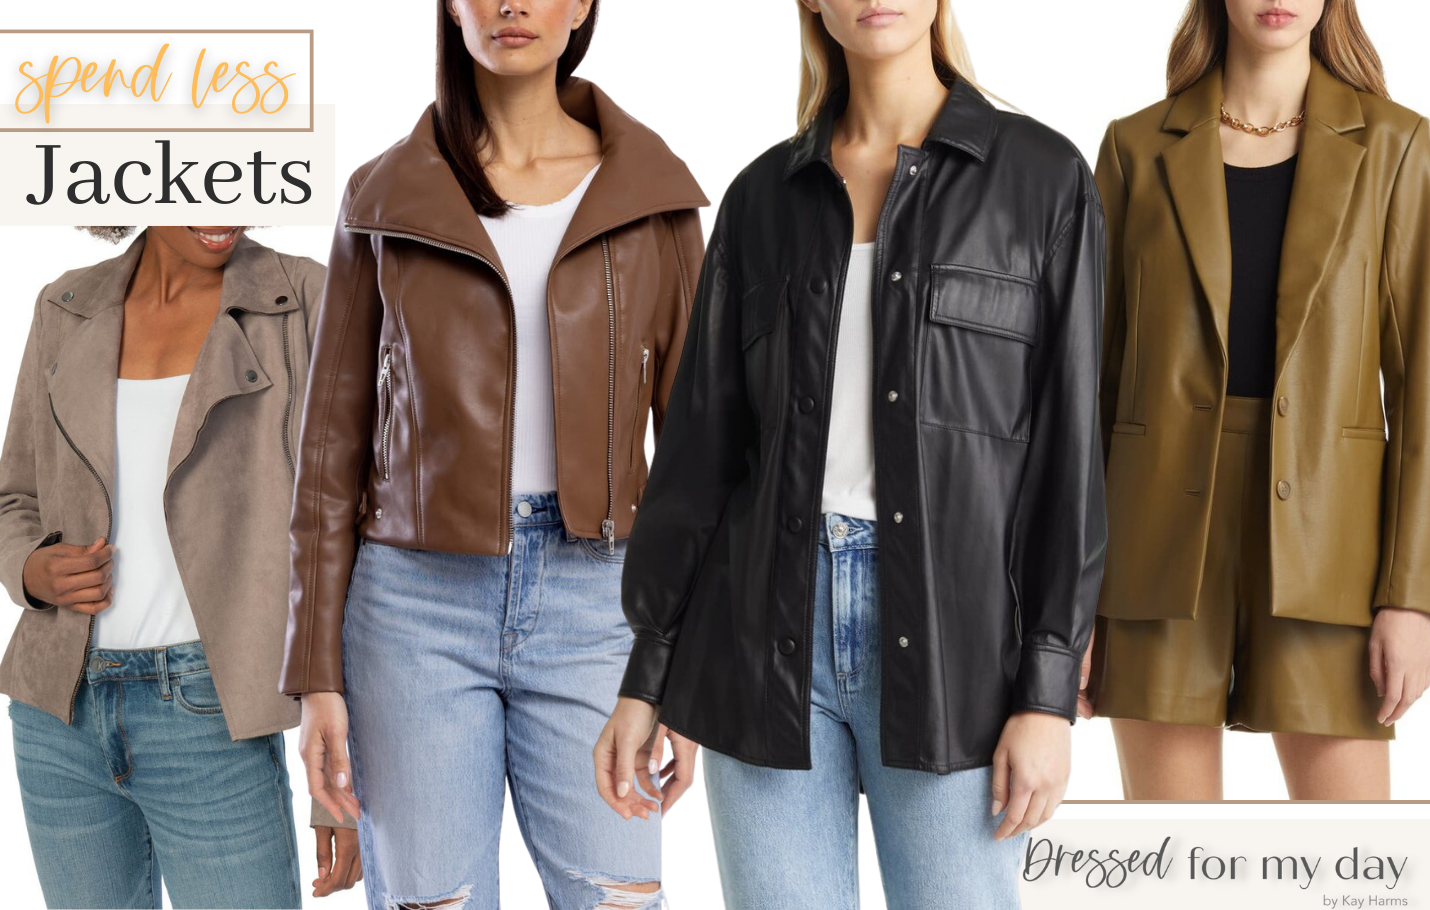 NSale Best Buys Spend Less Jackets